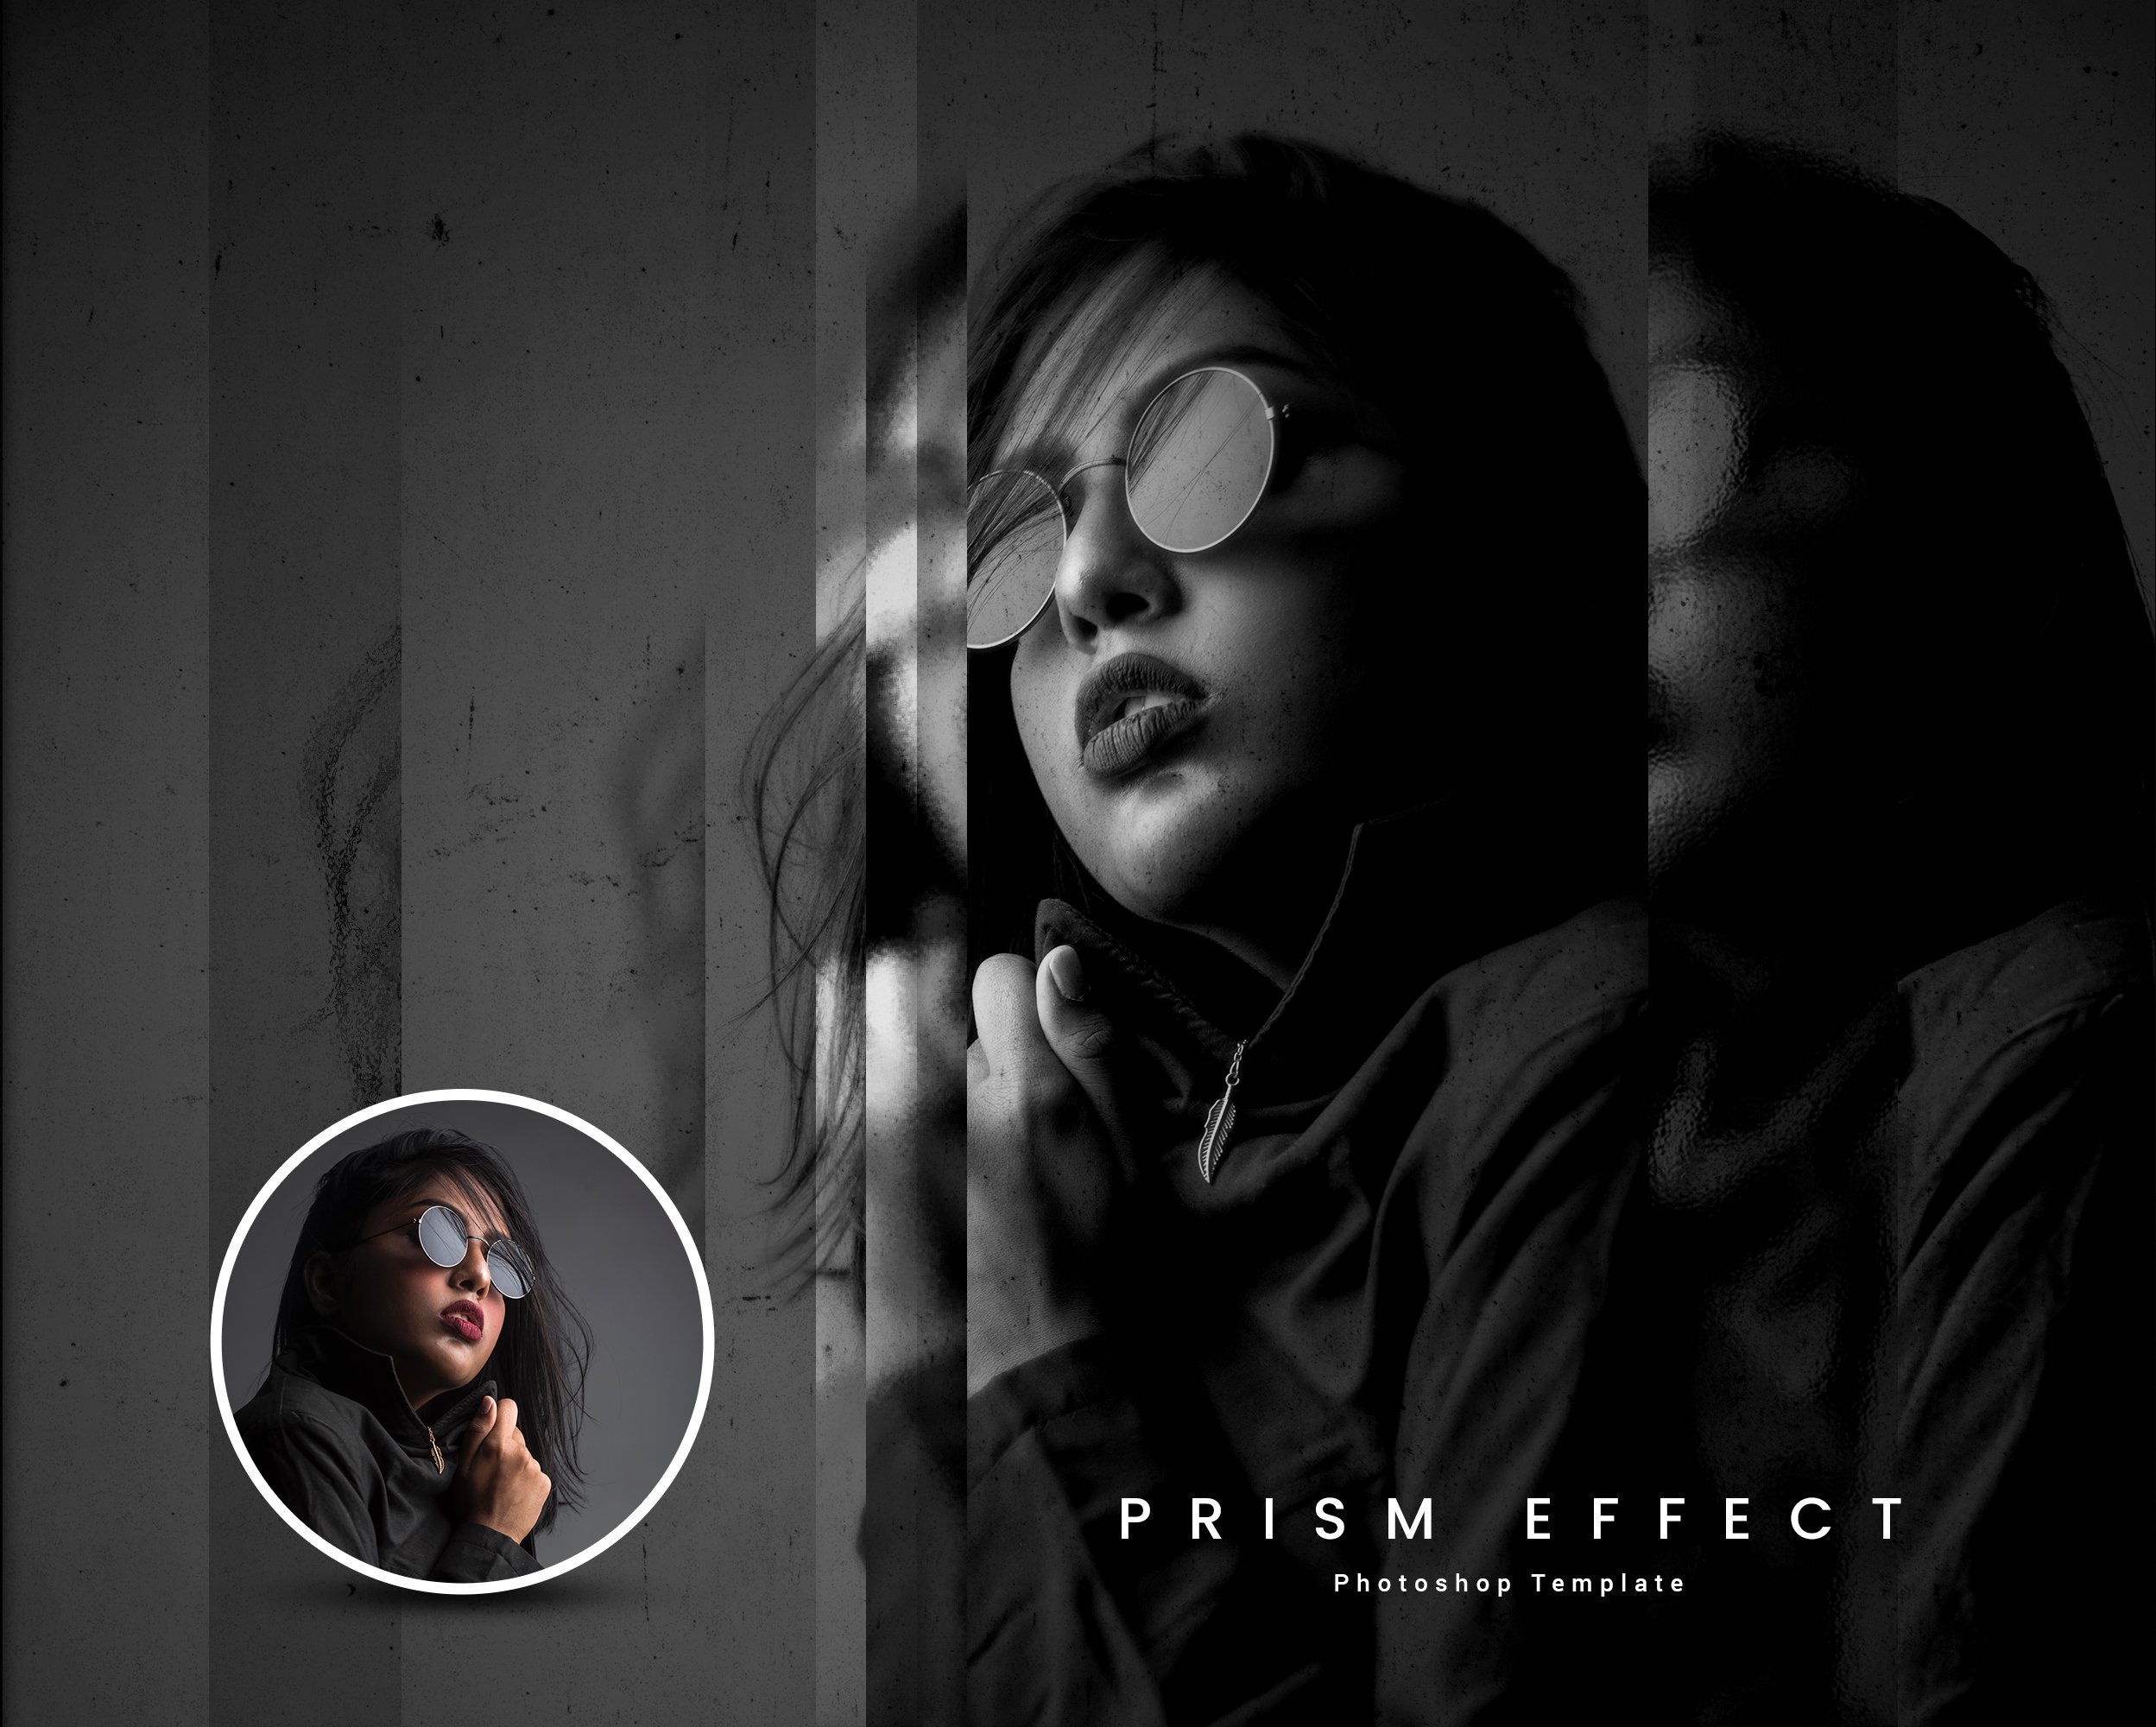 Prism Effect Photoshoppreview image.